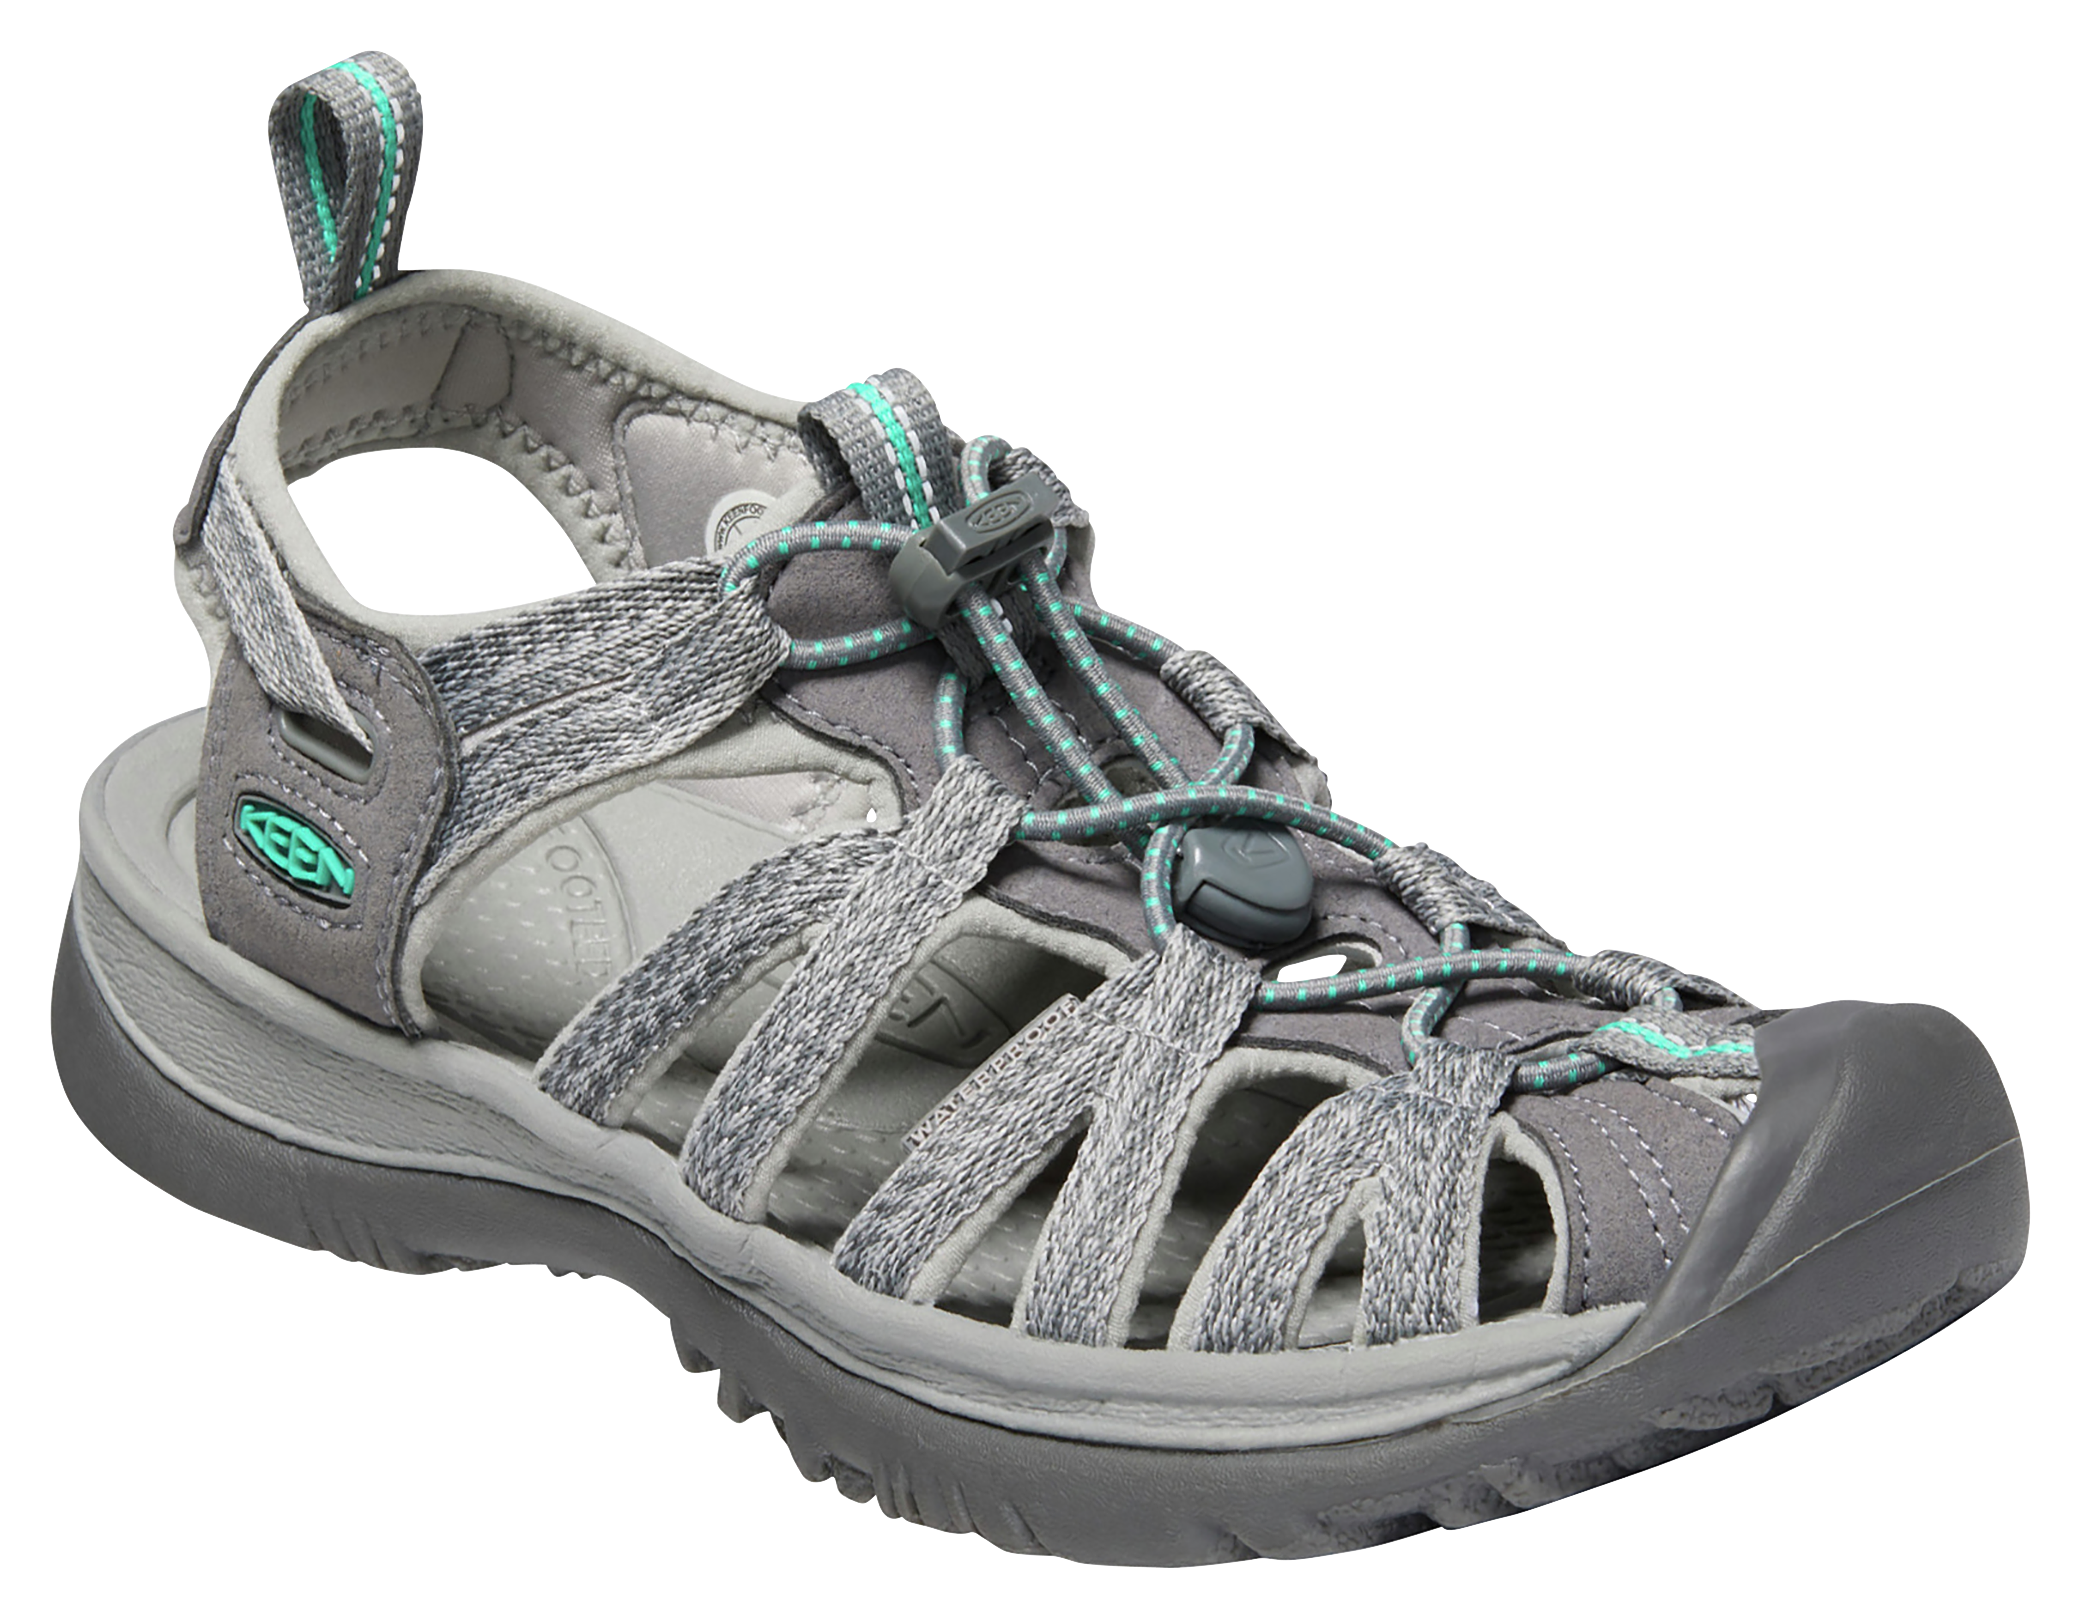 Keen Sandals for Ladies Cabela's